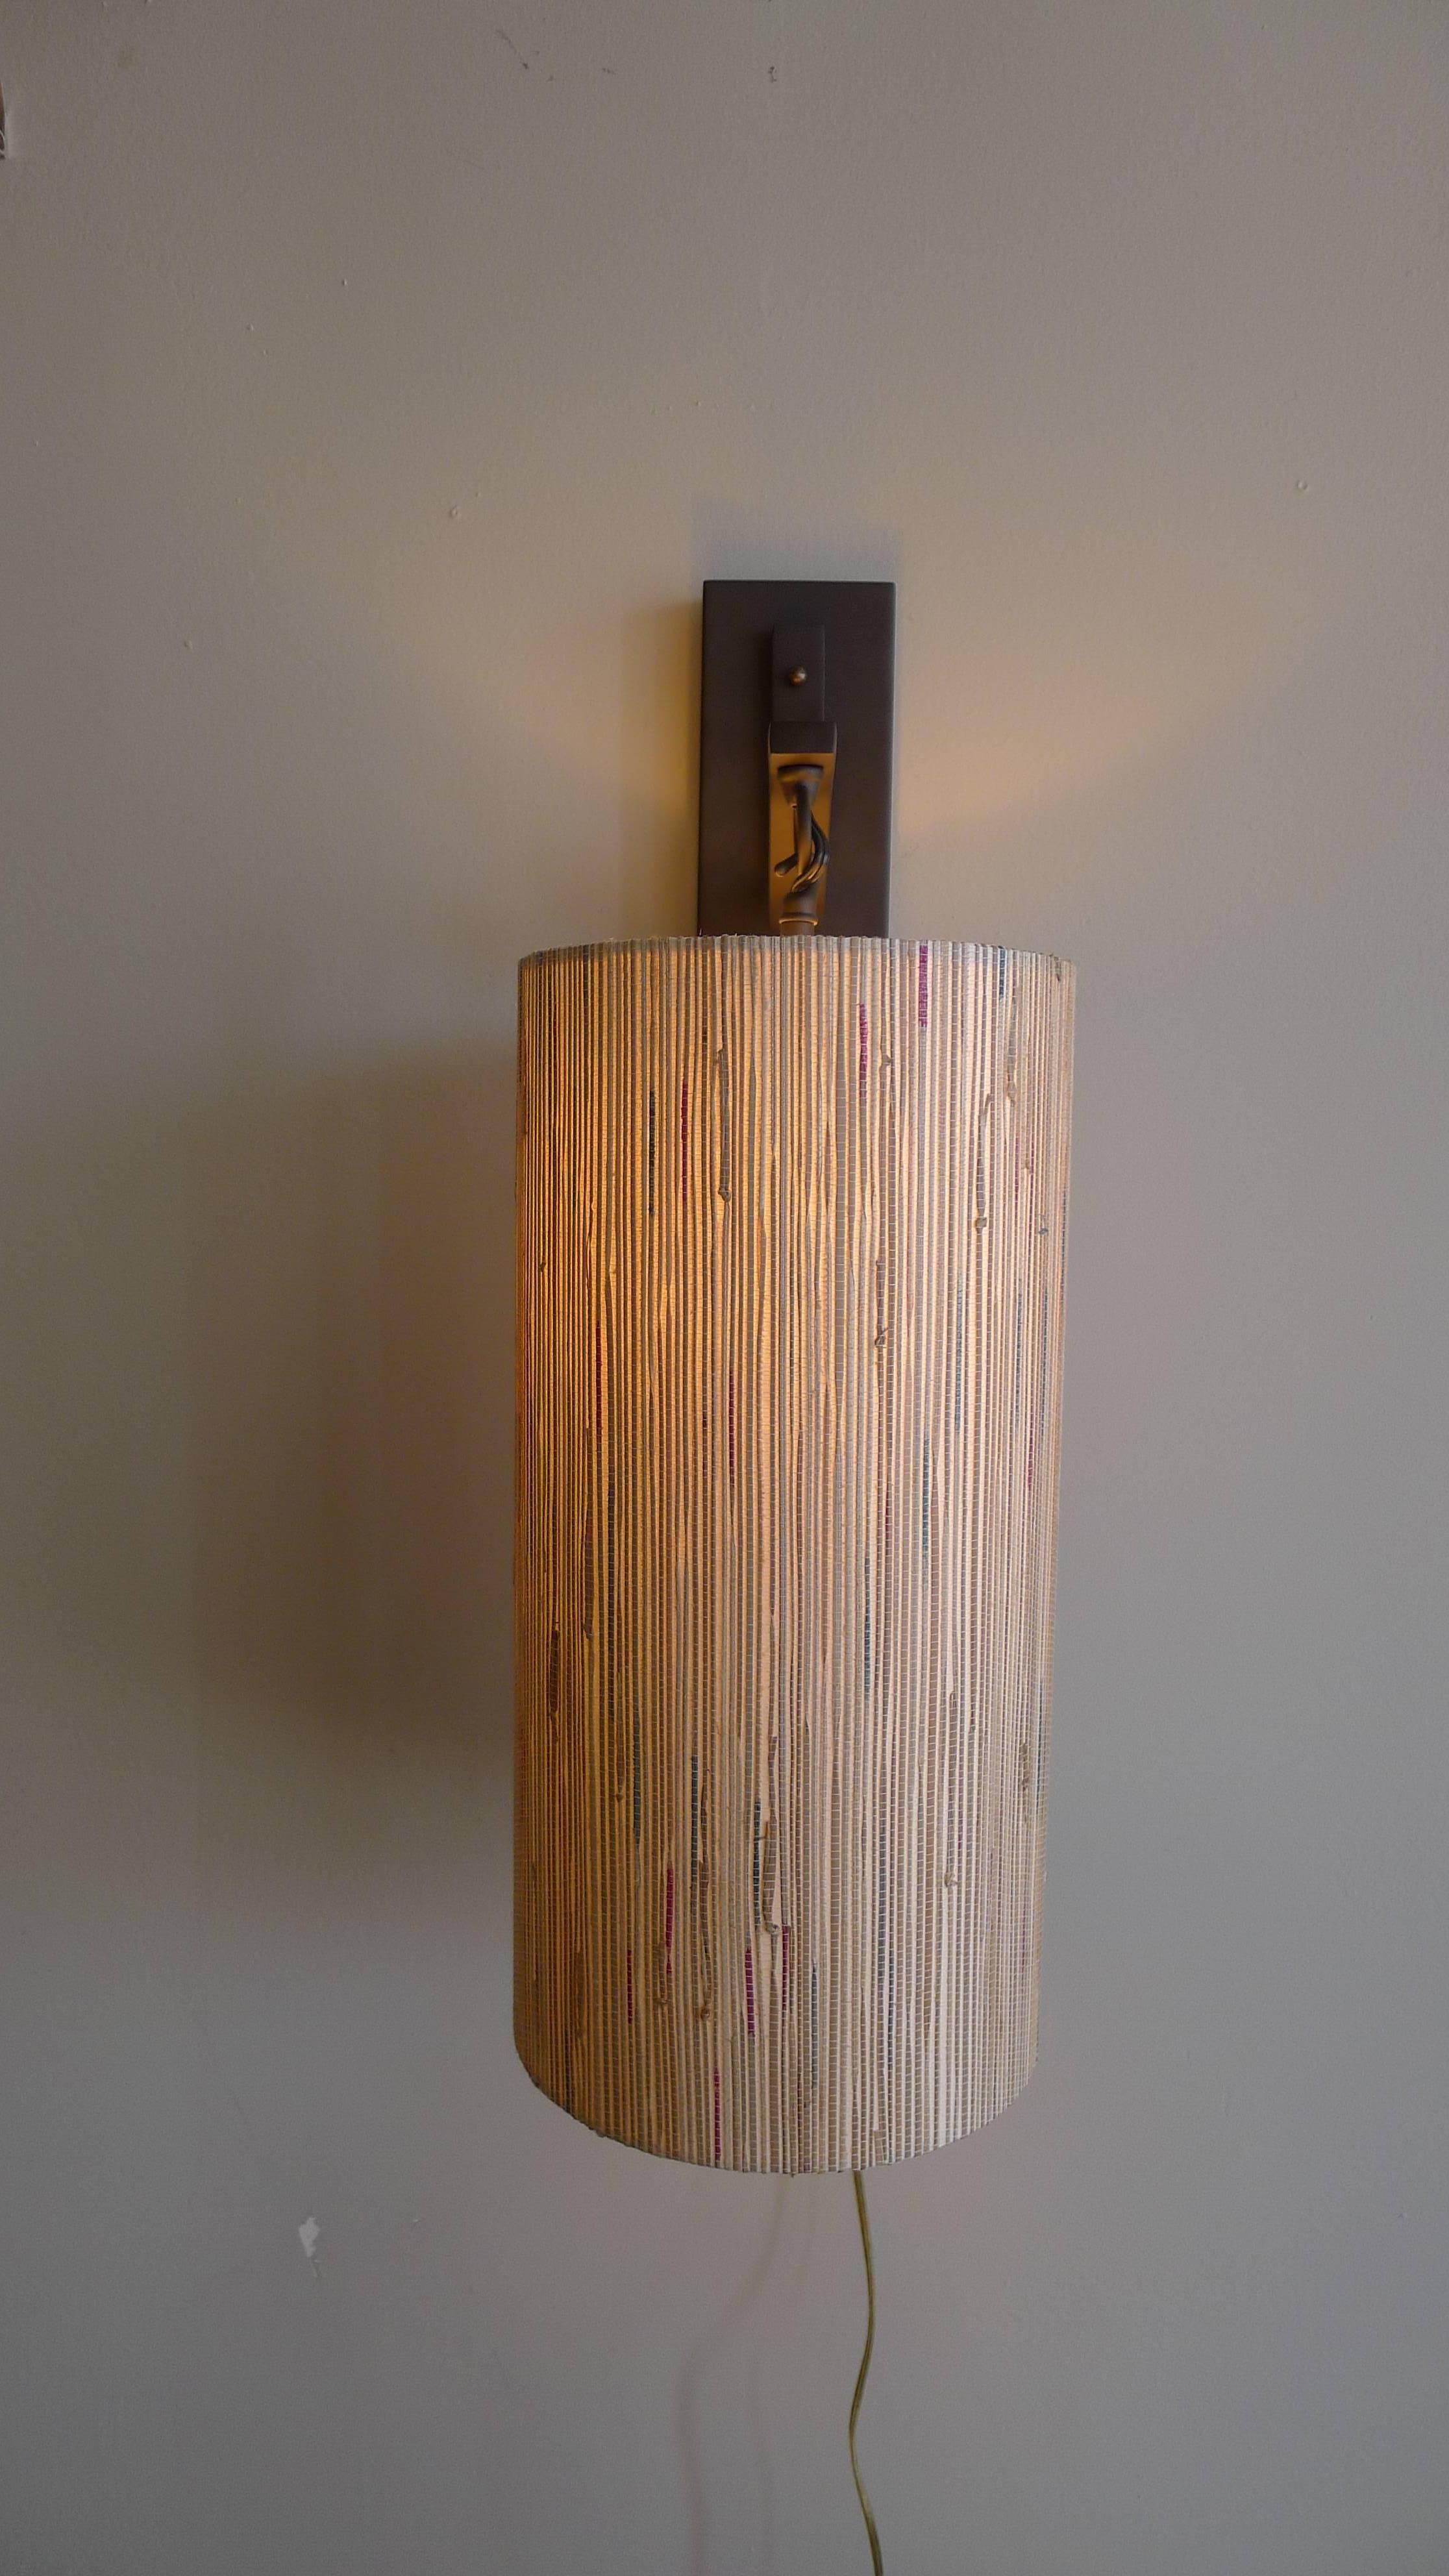 Modern sconce in oil rubbed bronze metal with custom grass cloth shade by Paul Marra. Currently a pair available, or by order. The custom shade is made of grasscloth in subtle colors. Price is per each sconce. Shade 16 x 8